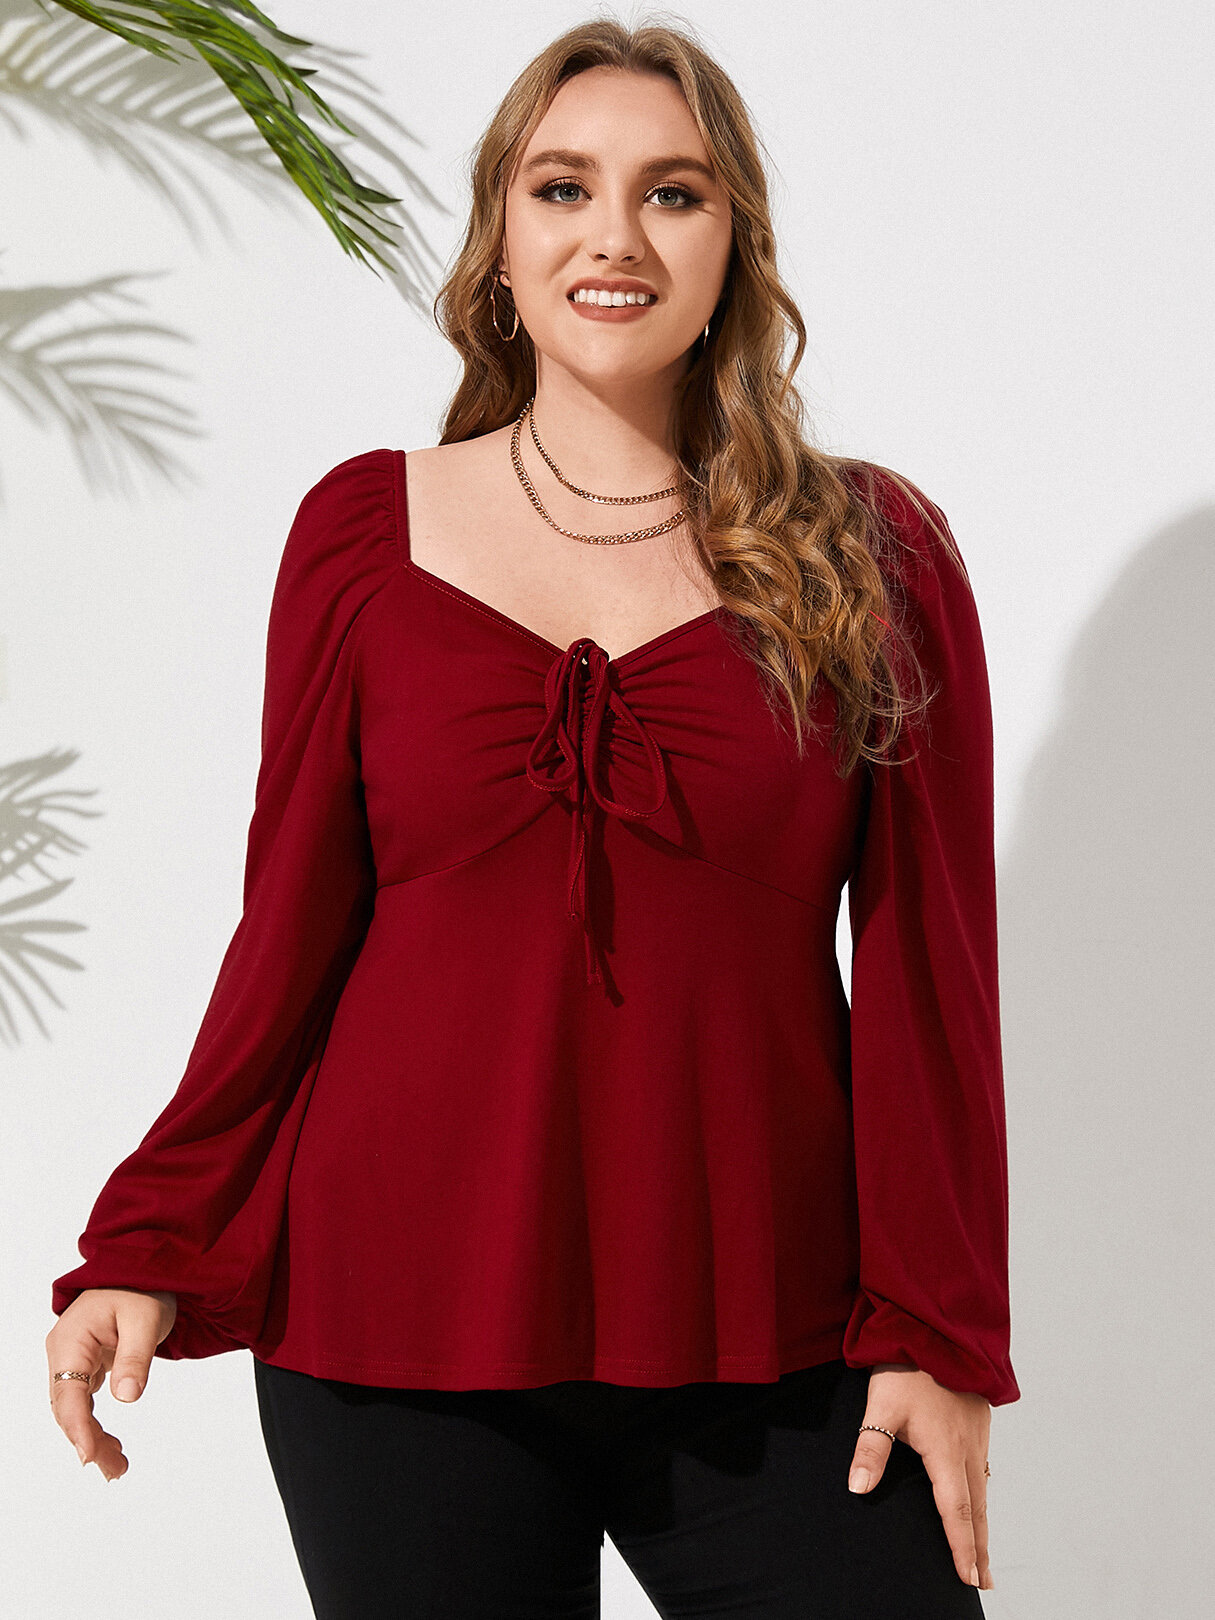 Plus Size Drawstring Backless Design Long Sleeves Tee